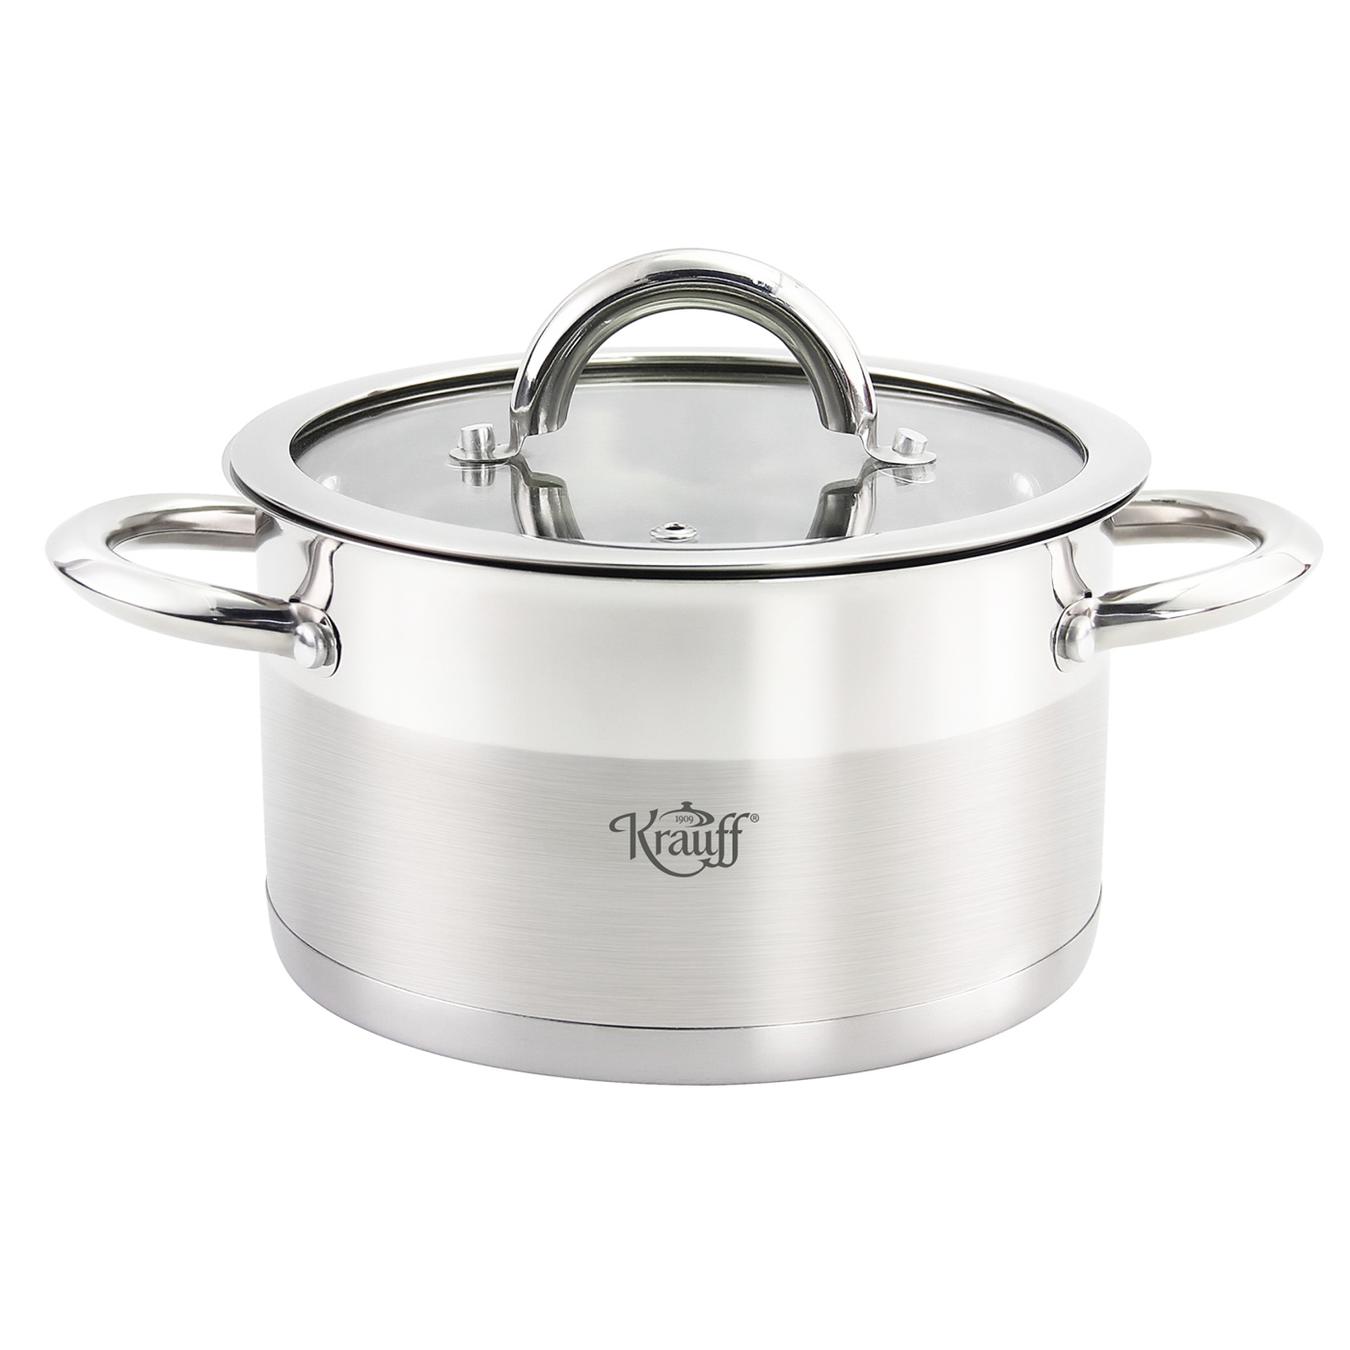 Krauff saucepan with a glass lid and metal handles 4.7 l